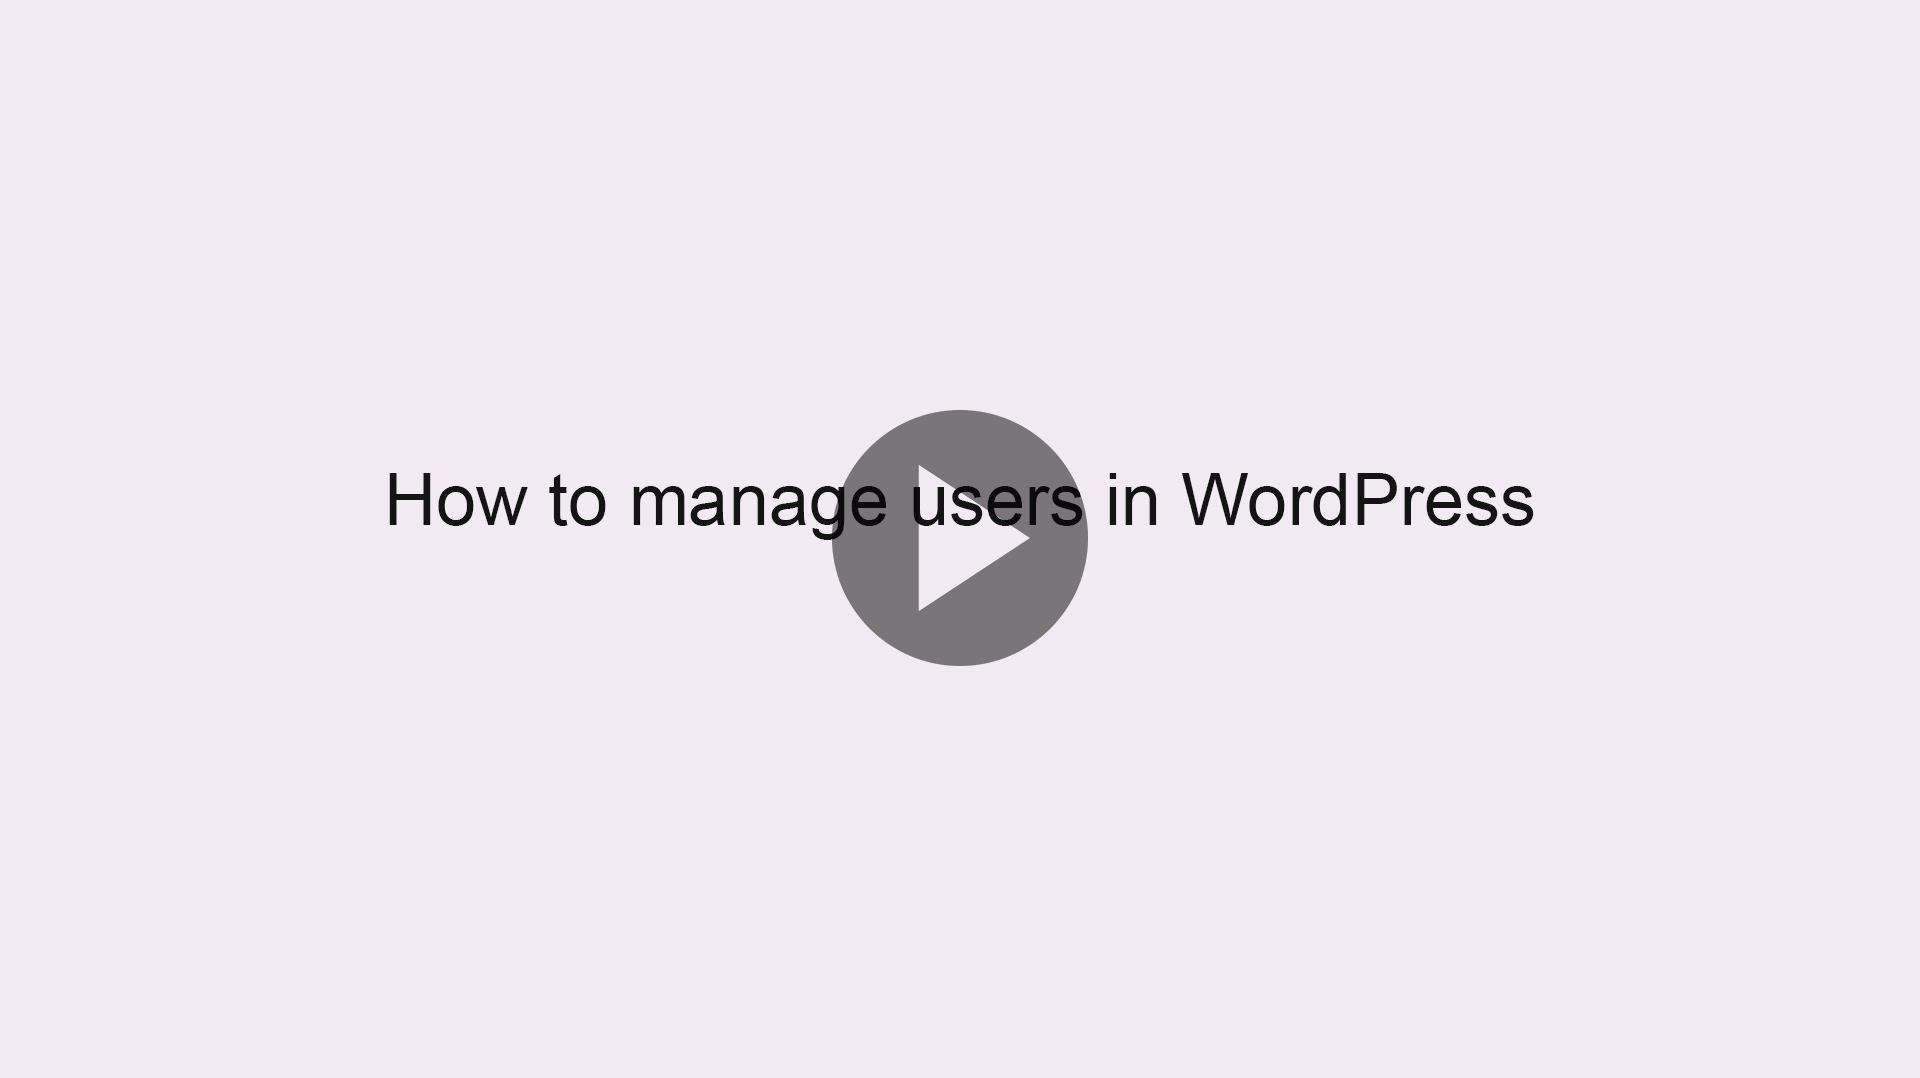 How to manage users in WordPress